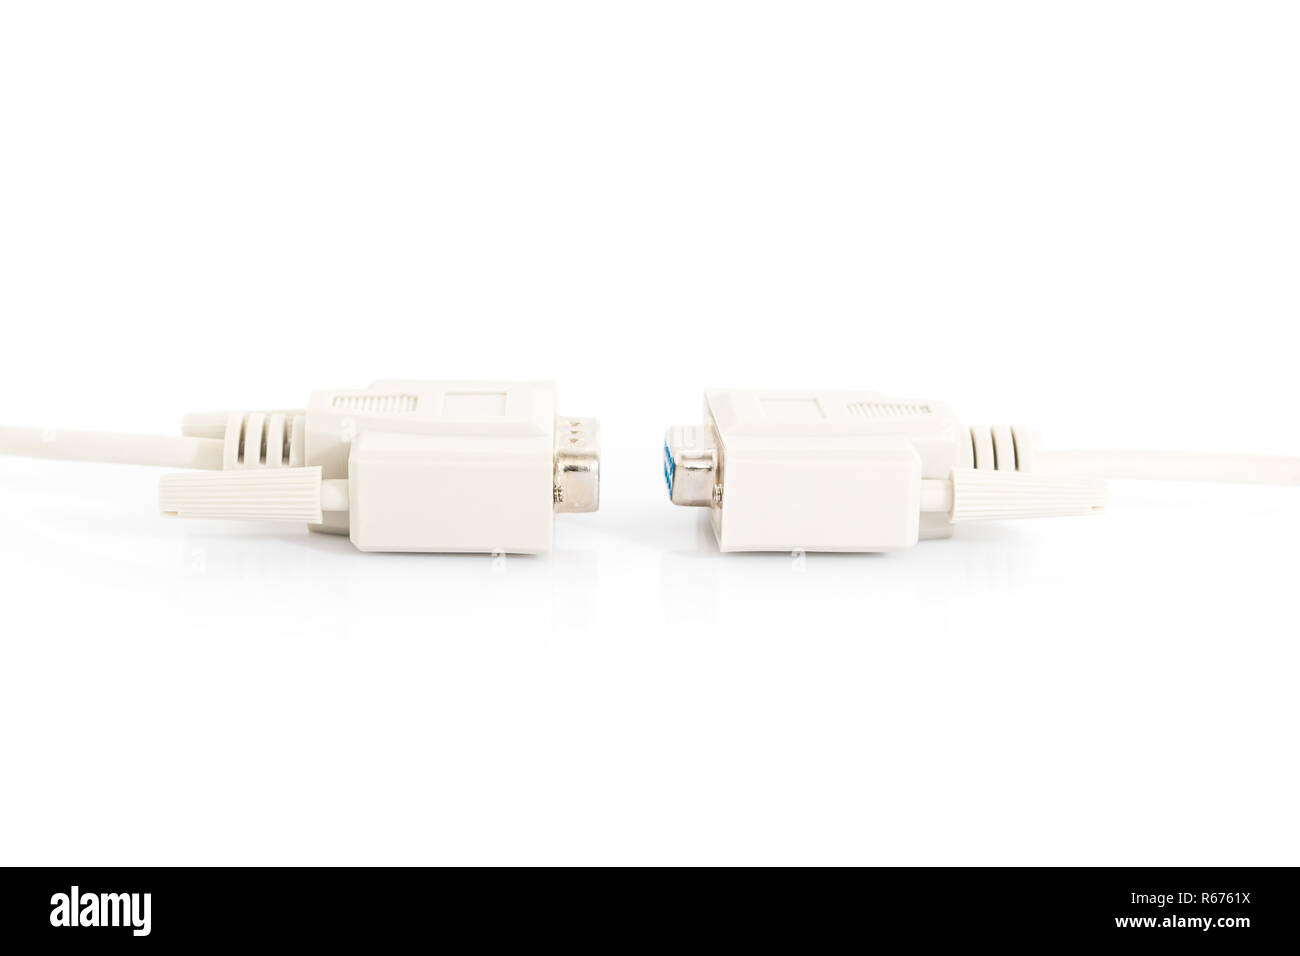 VGA input cable  connector with white cord Stock Photo